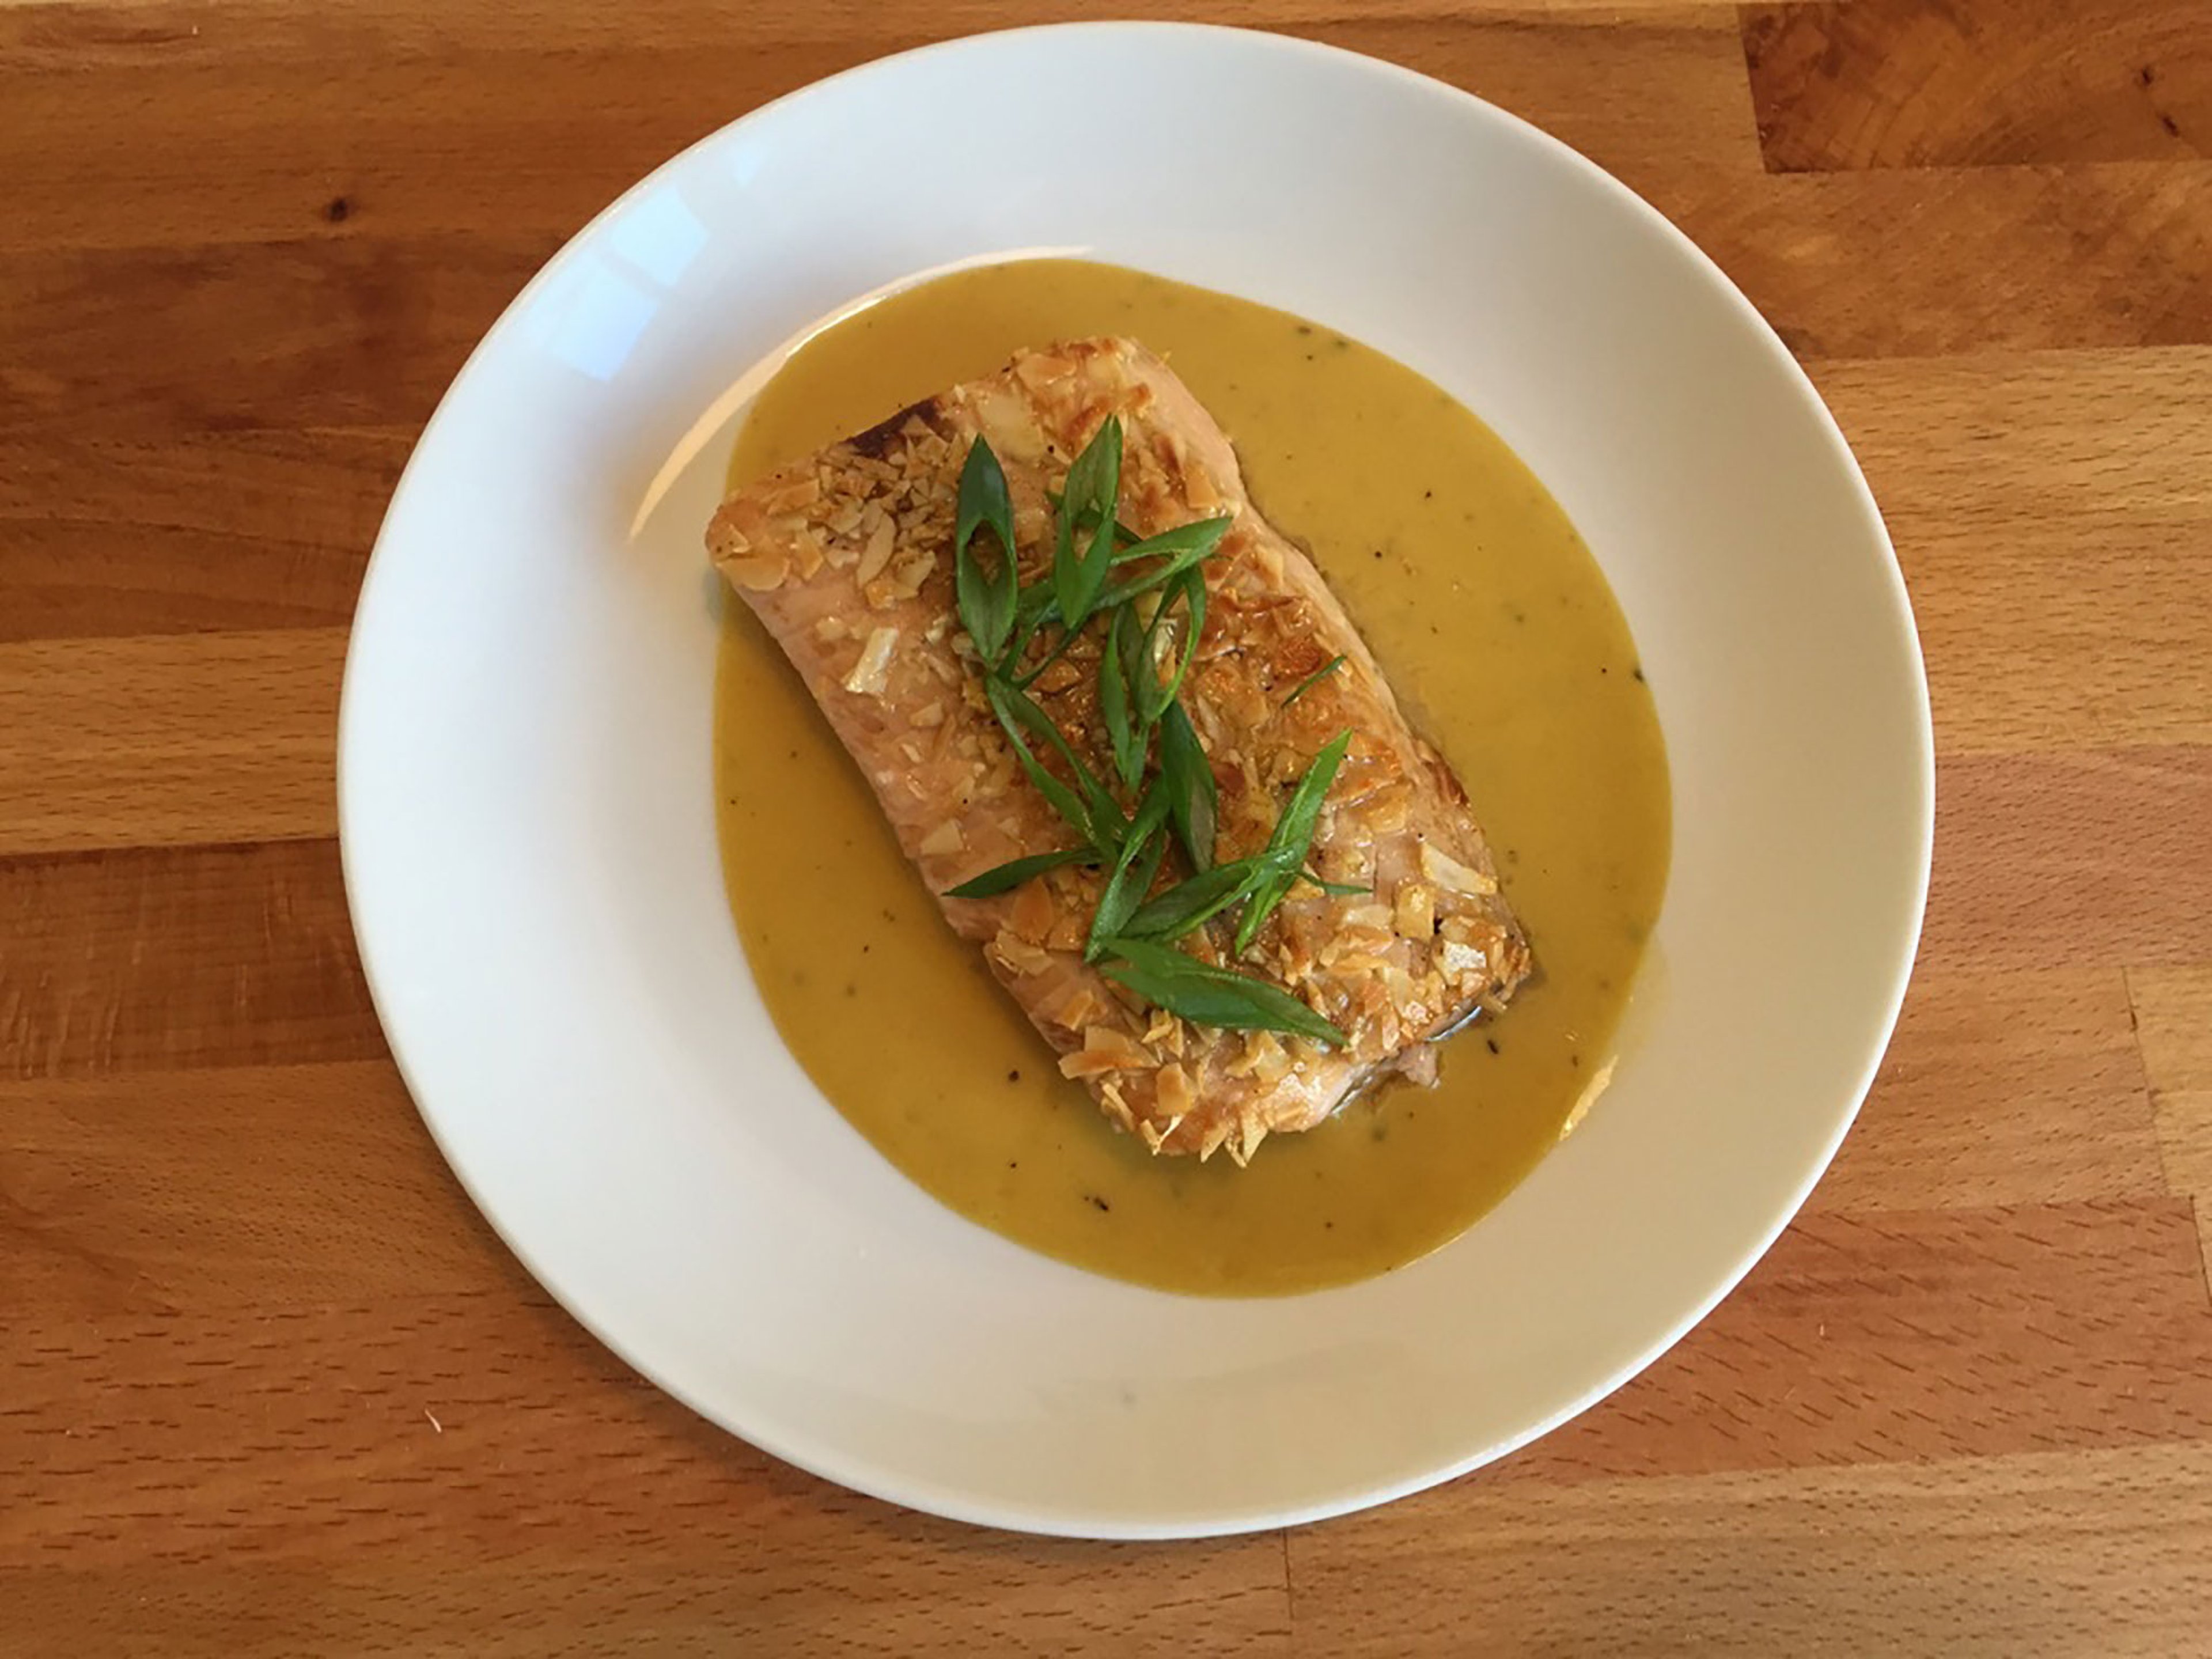 Almond-crusted fish fillet with honey-mustard-sauce